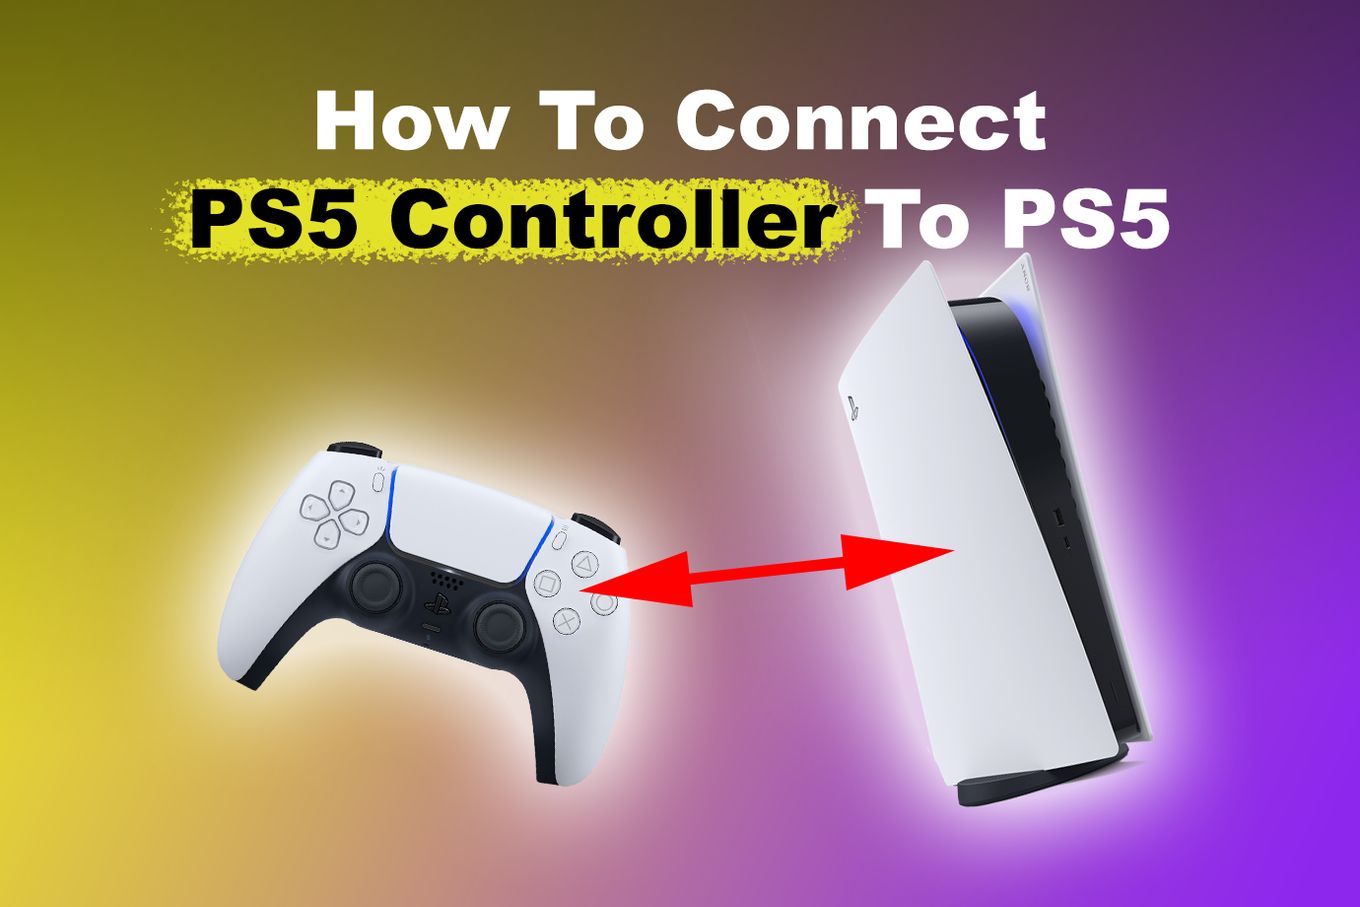 HOW TO USE PS5 CONTROLLER ON RED DEAD REDEMPTION 2 PC!